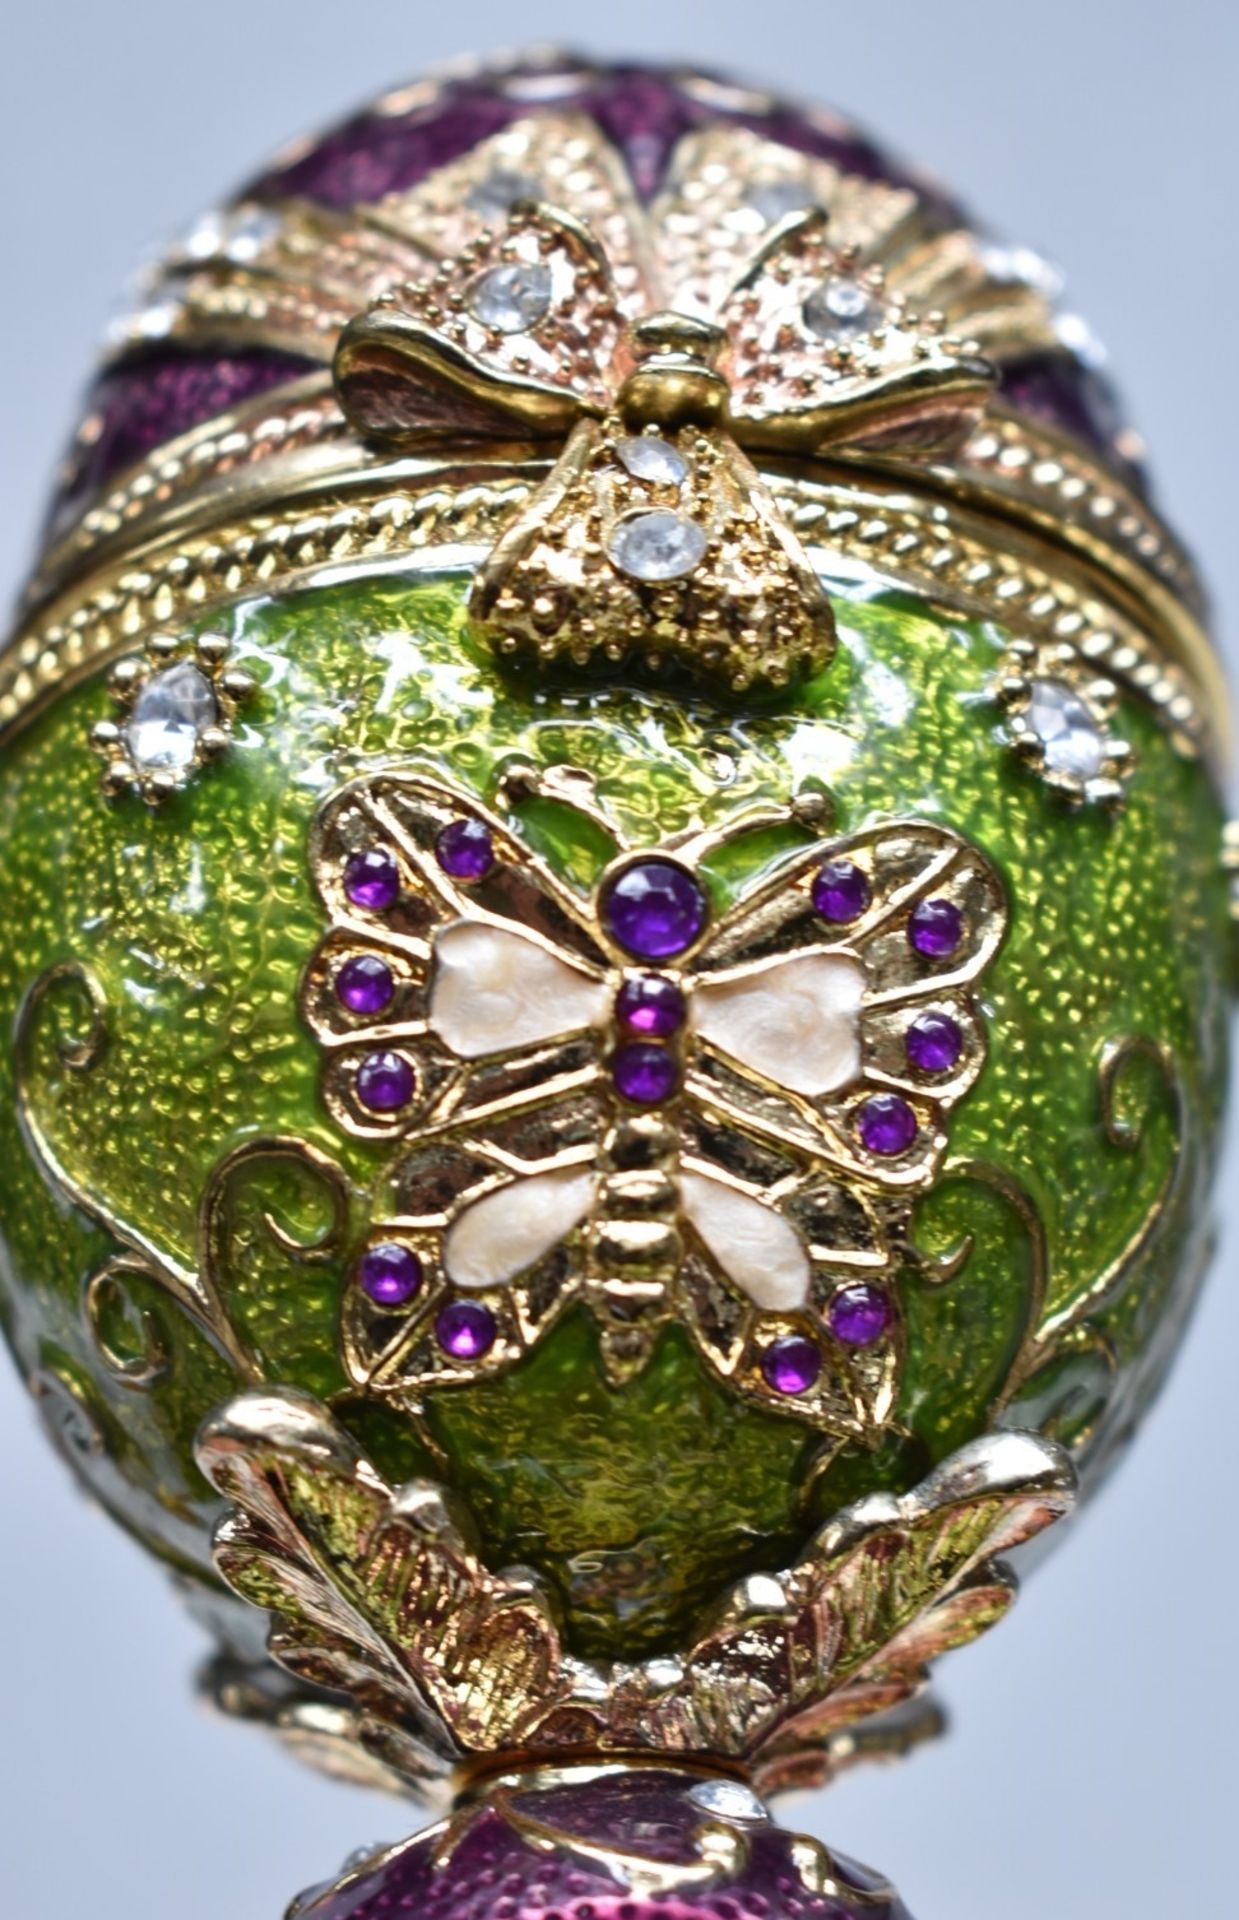 1 x Decorative Faberge-Style Clockwork Musical Enameled Egg, In Purple and Green - Ref: CNT732/WH2/ - Image 3 of 3